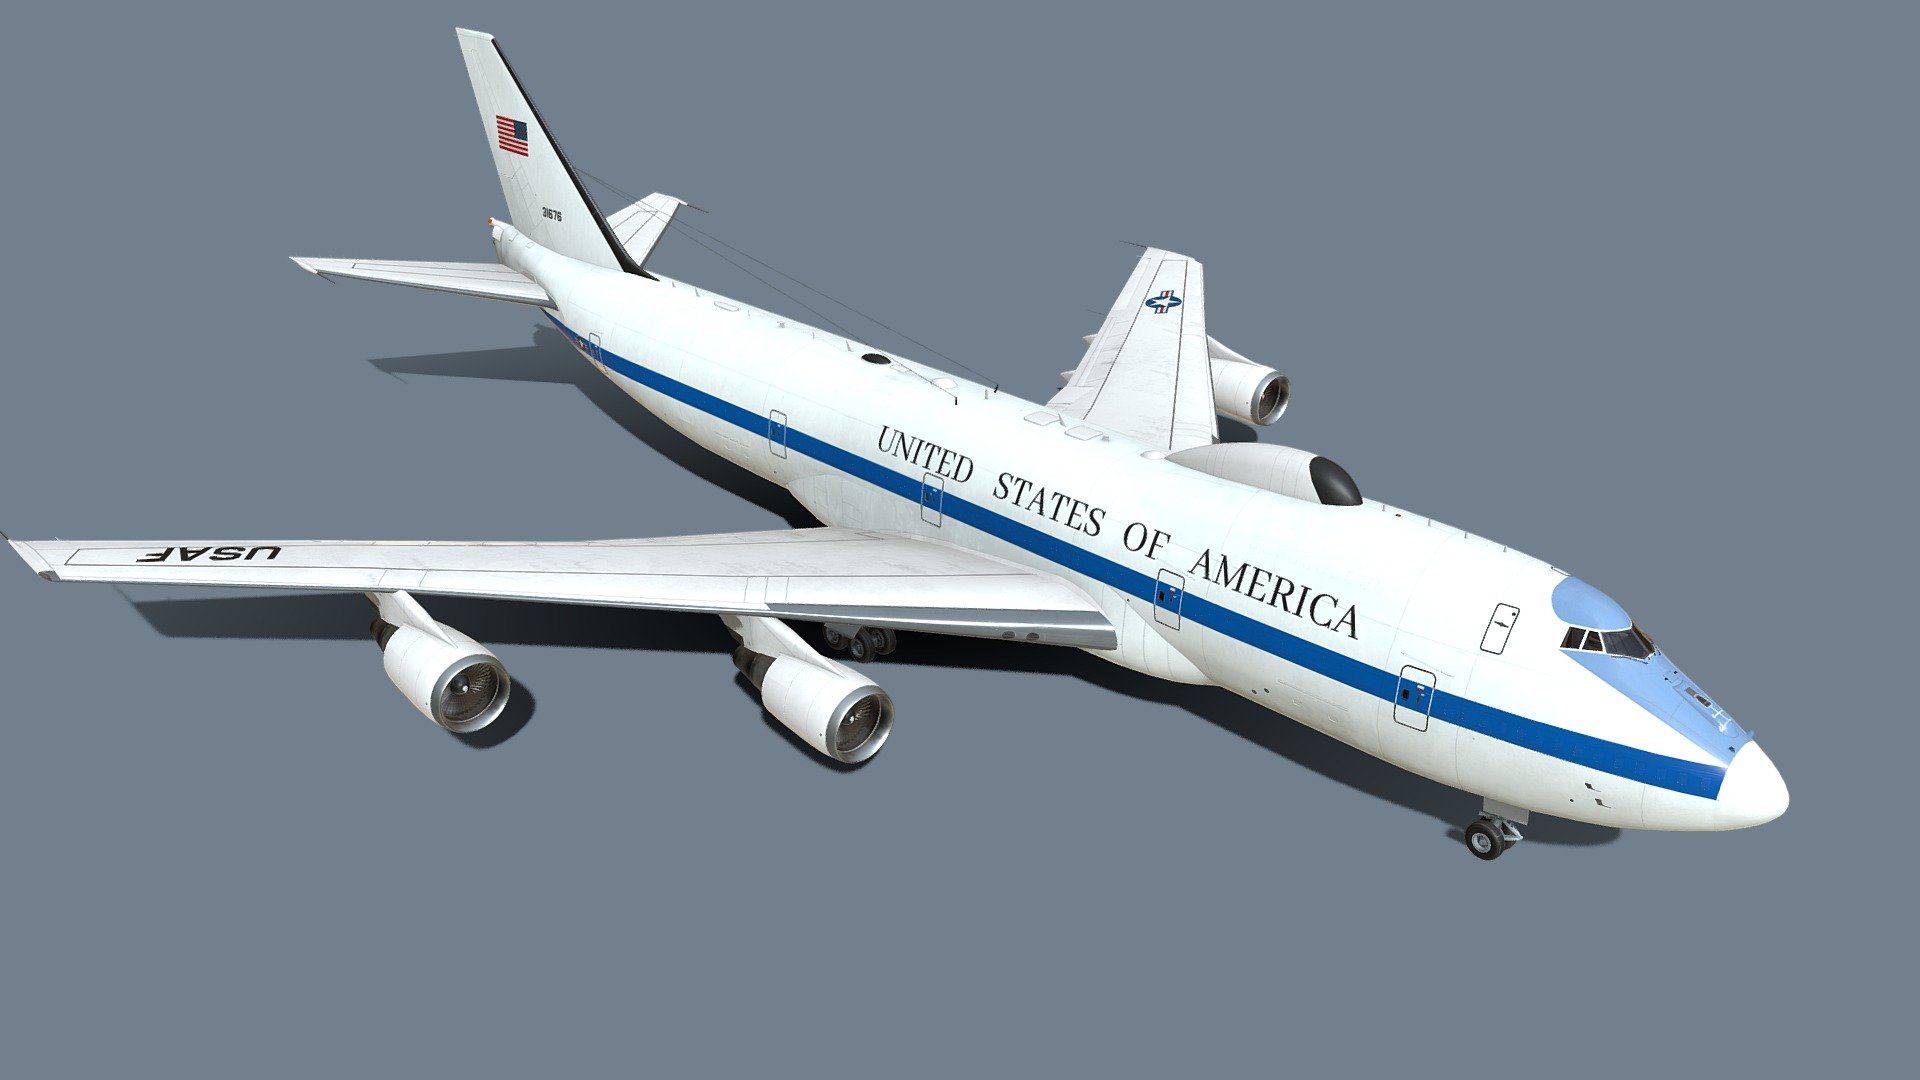 The Boeing E-4 Advanced Airborne Command Post (AACP), the current &ldquo;Nightwatch